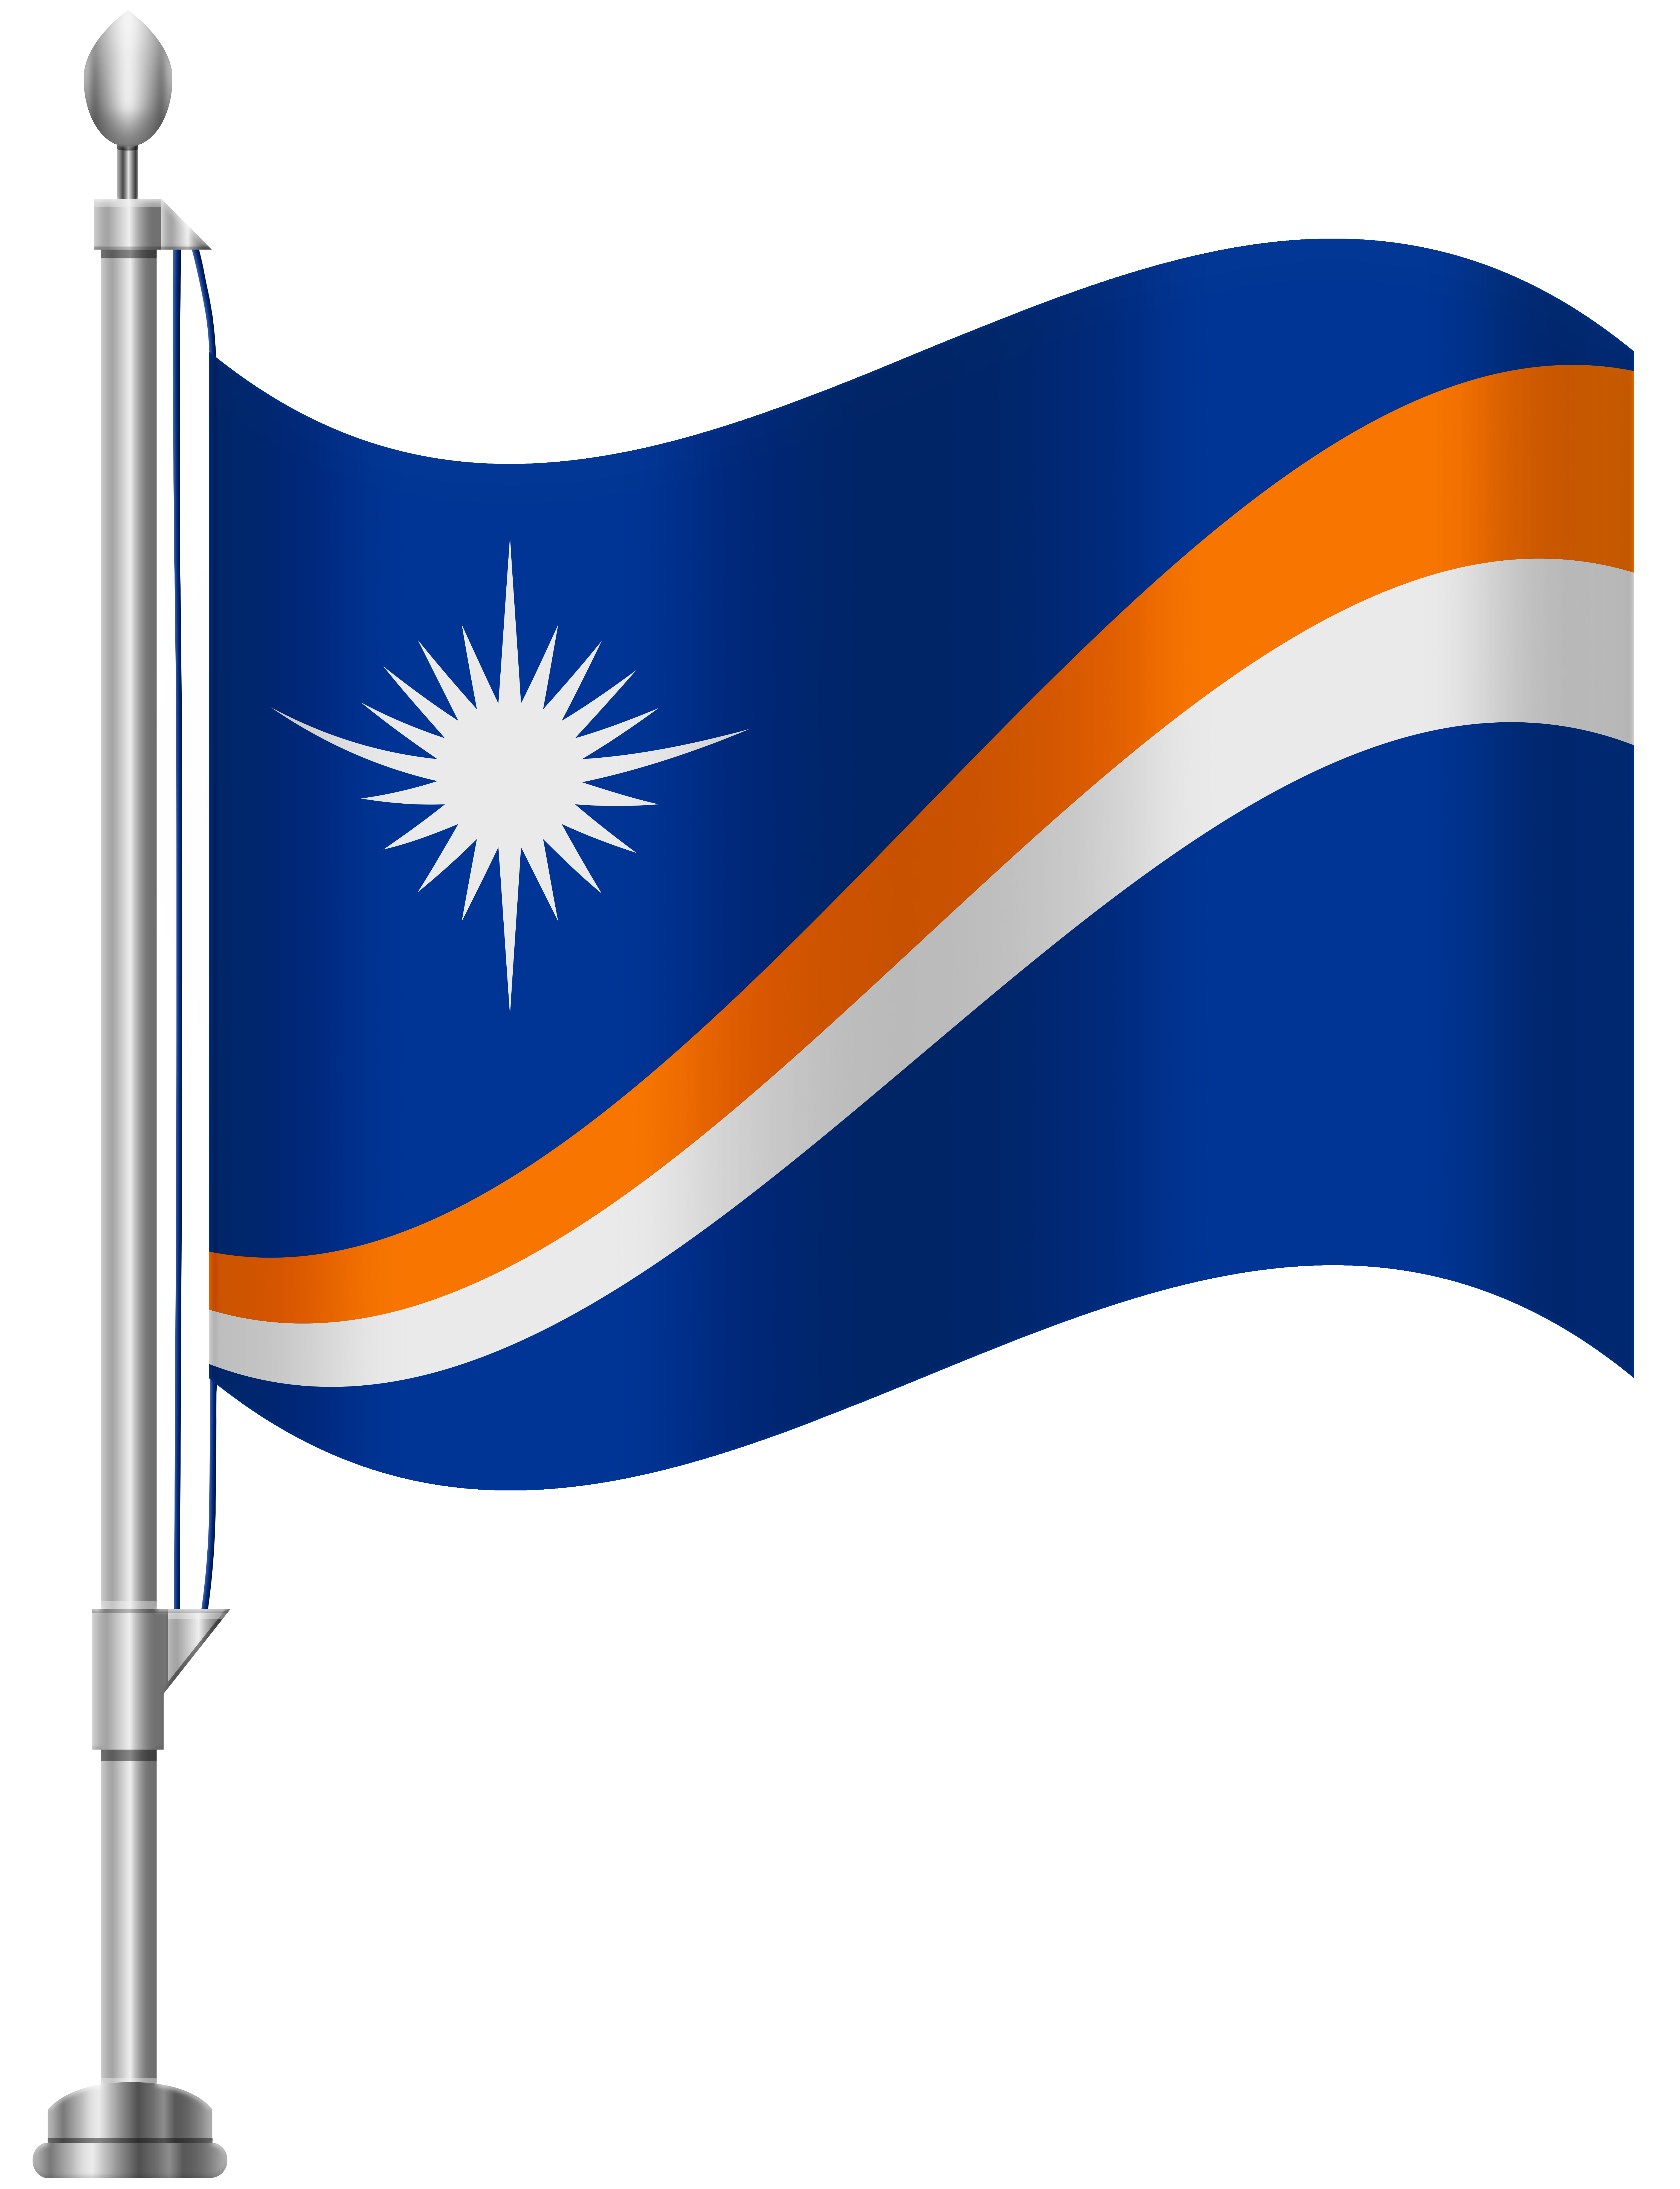 Island clipart small island. Marshal islands flag png